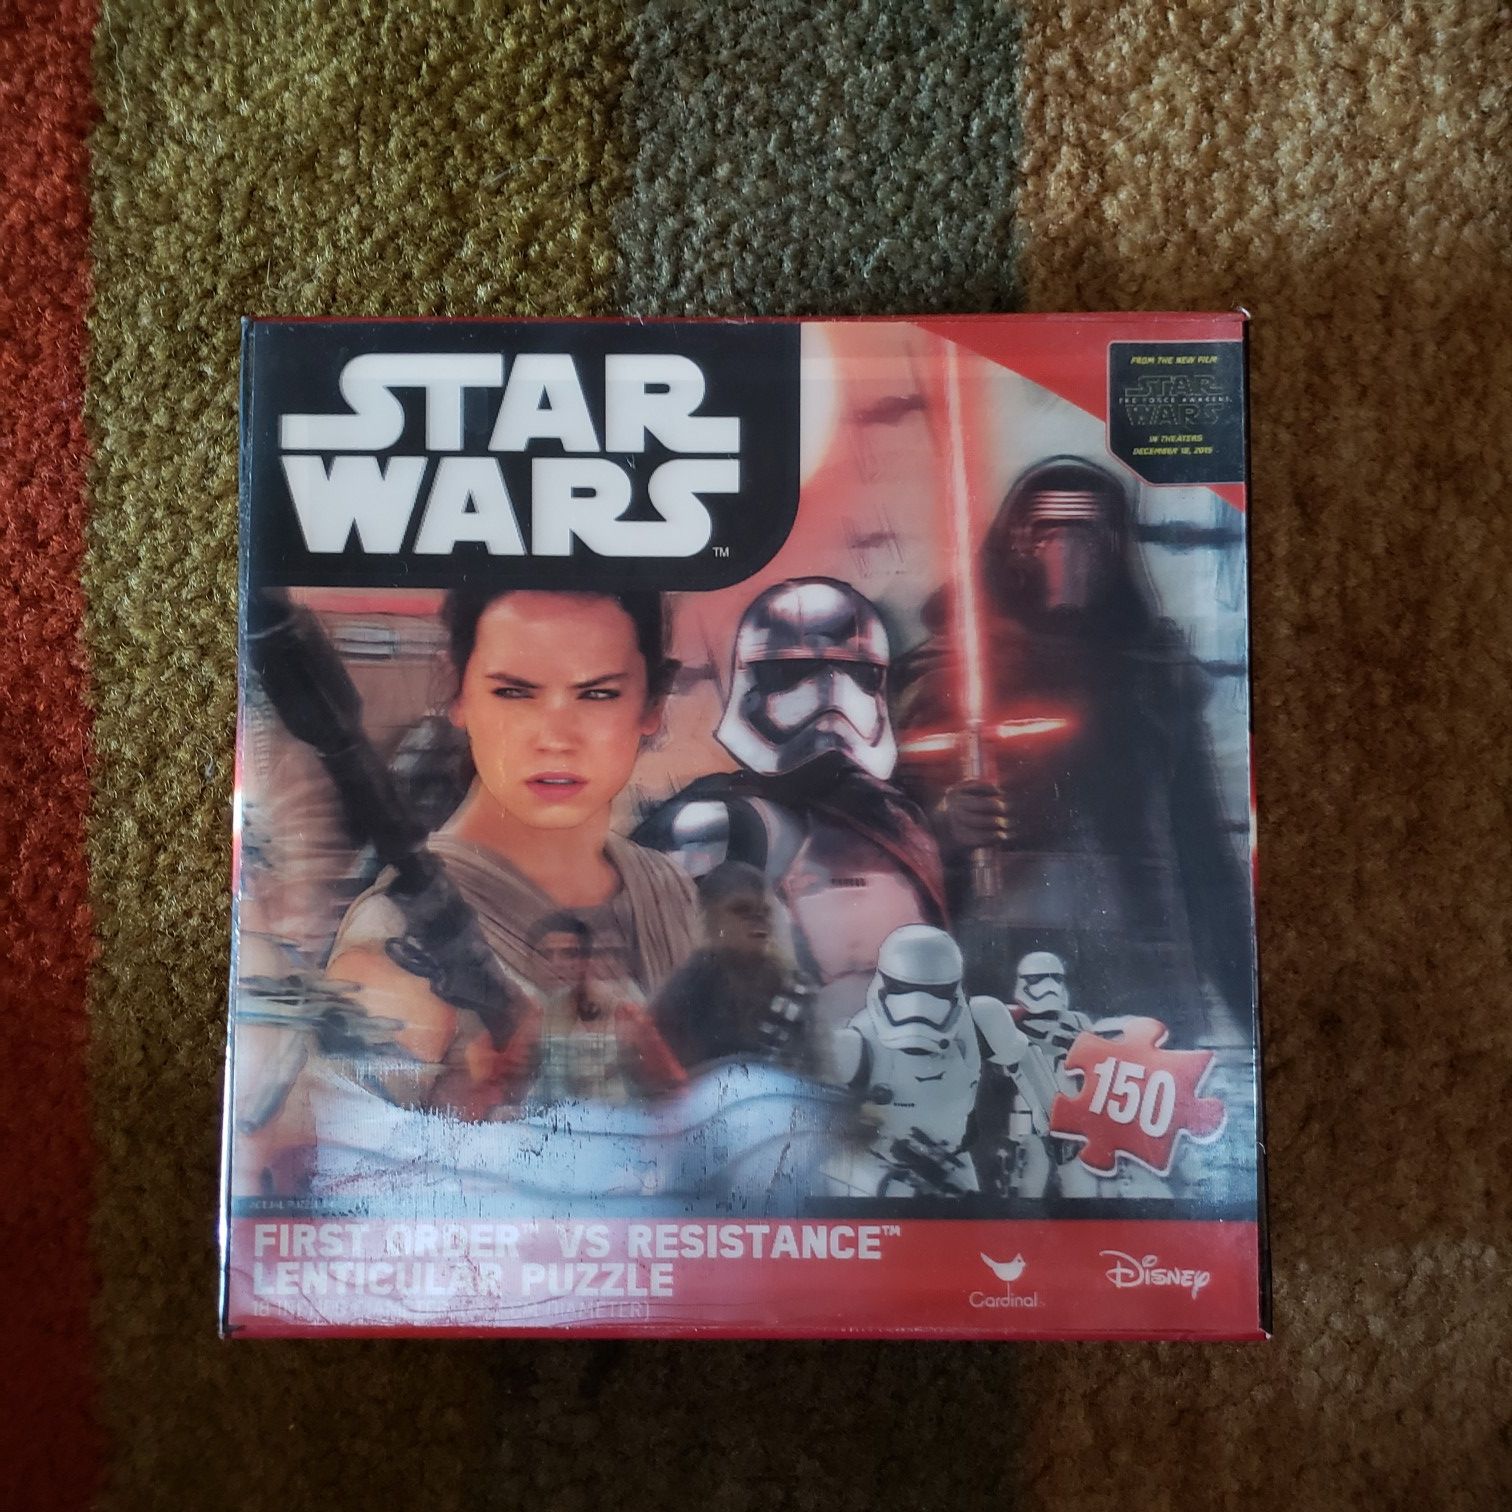 Star Wars Puzzles Box Toys Puzzles Games Disney's Star Wars NEW. MAKE ME AN OFFER!!!